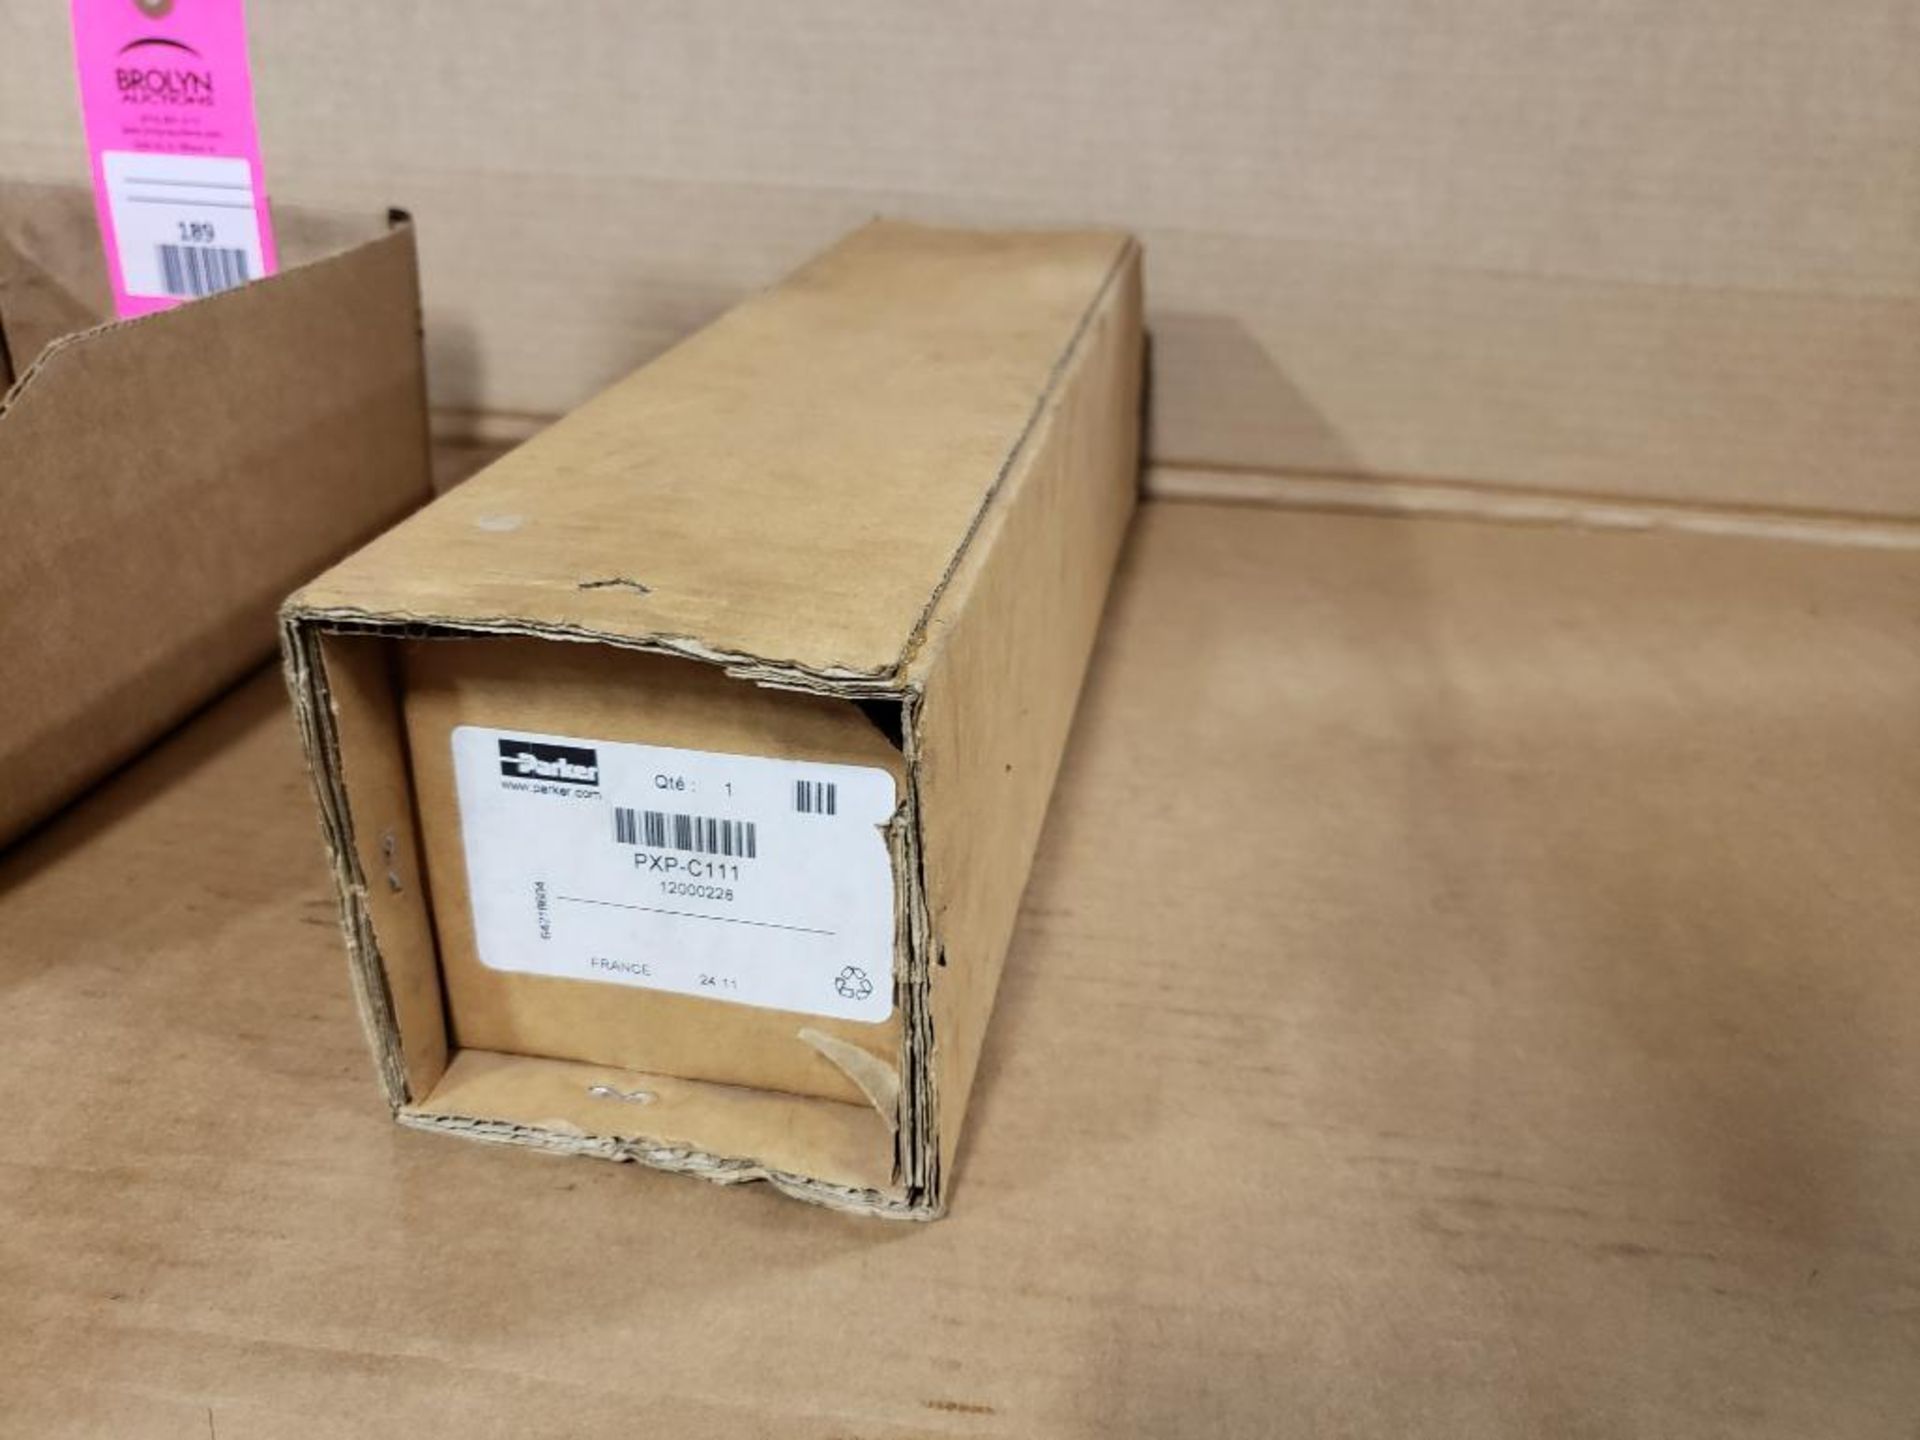 Parker PXP-C111 2-hand pneumatic valve control. New in box.